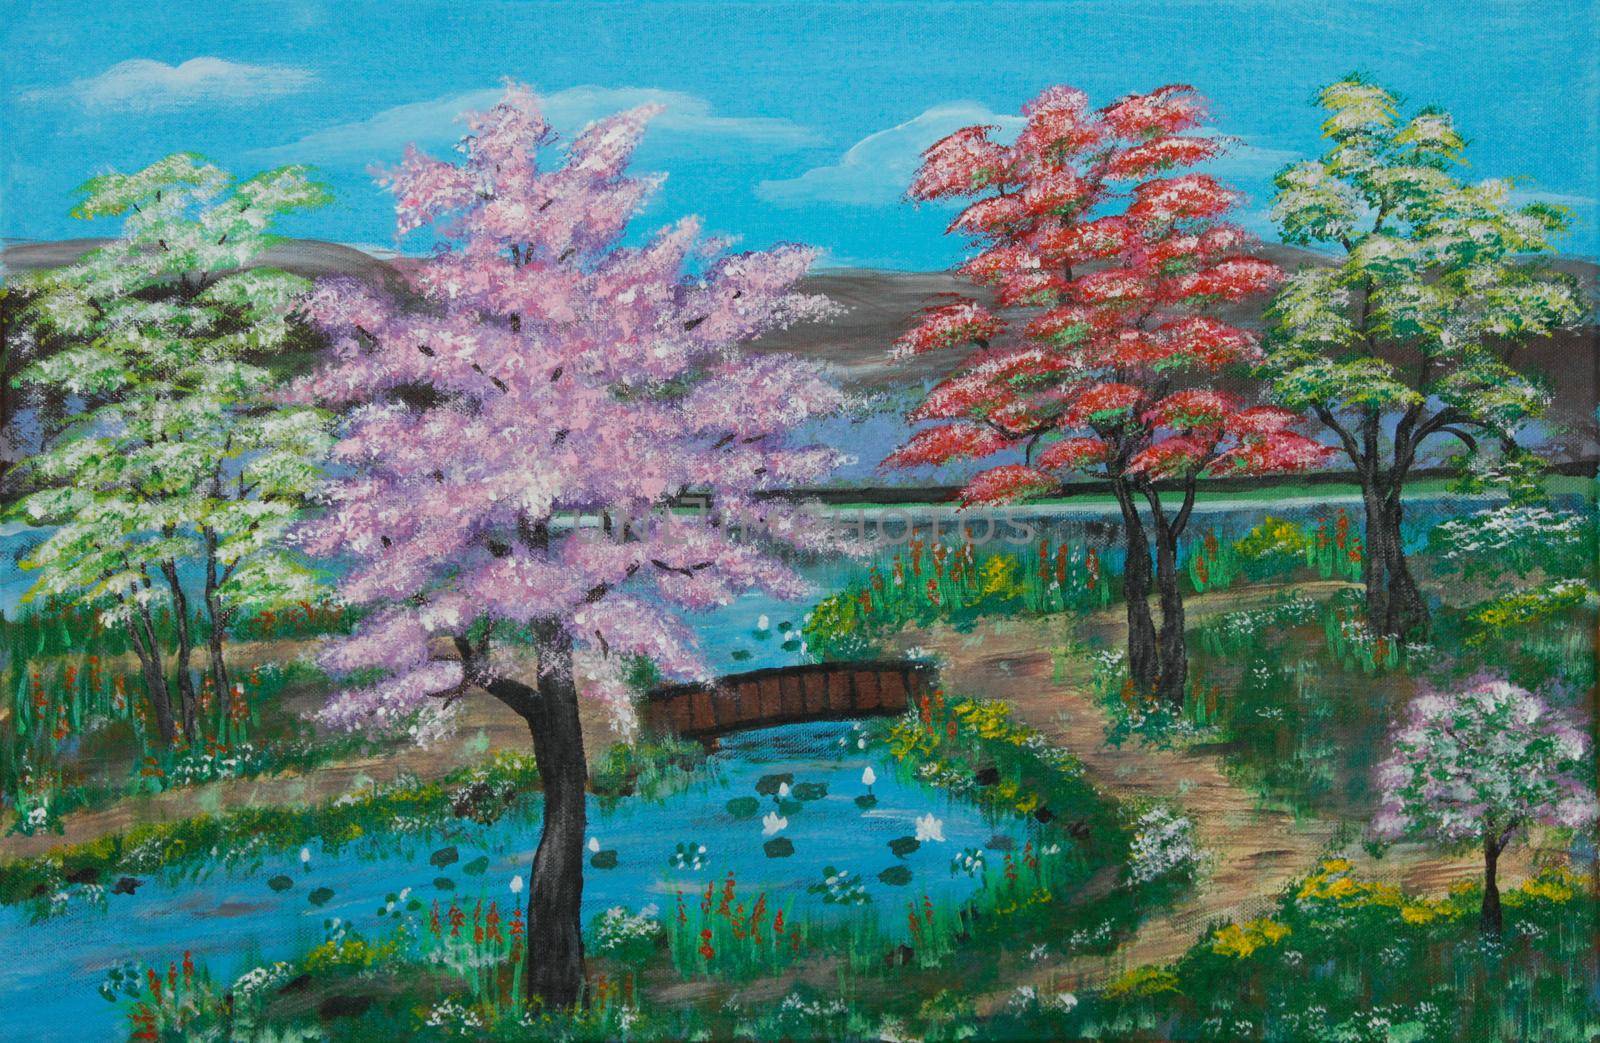 Flowering Trees along the River at Springtime with mountains in background